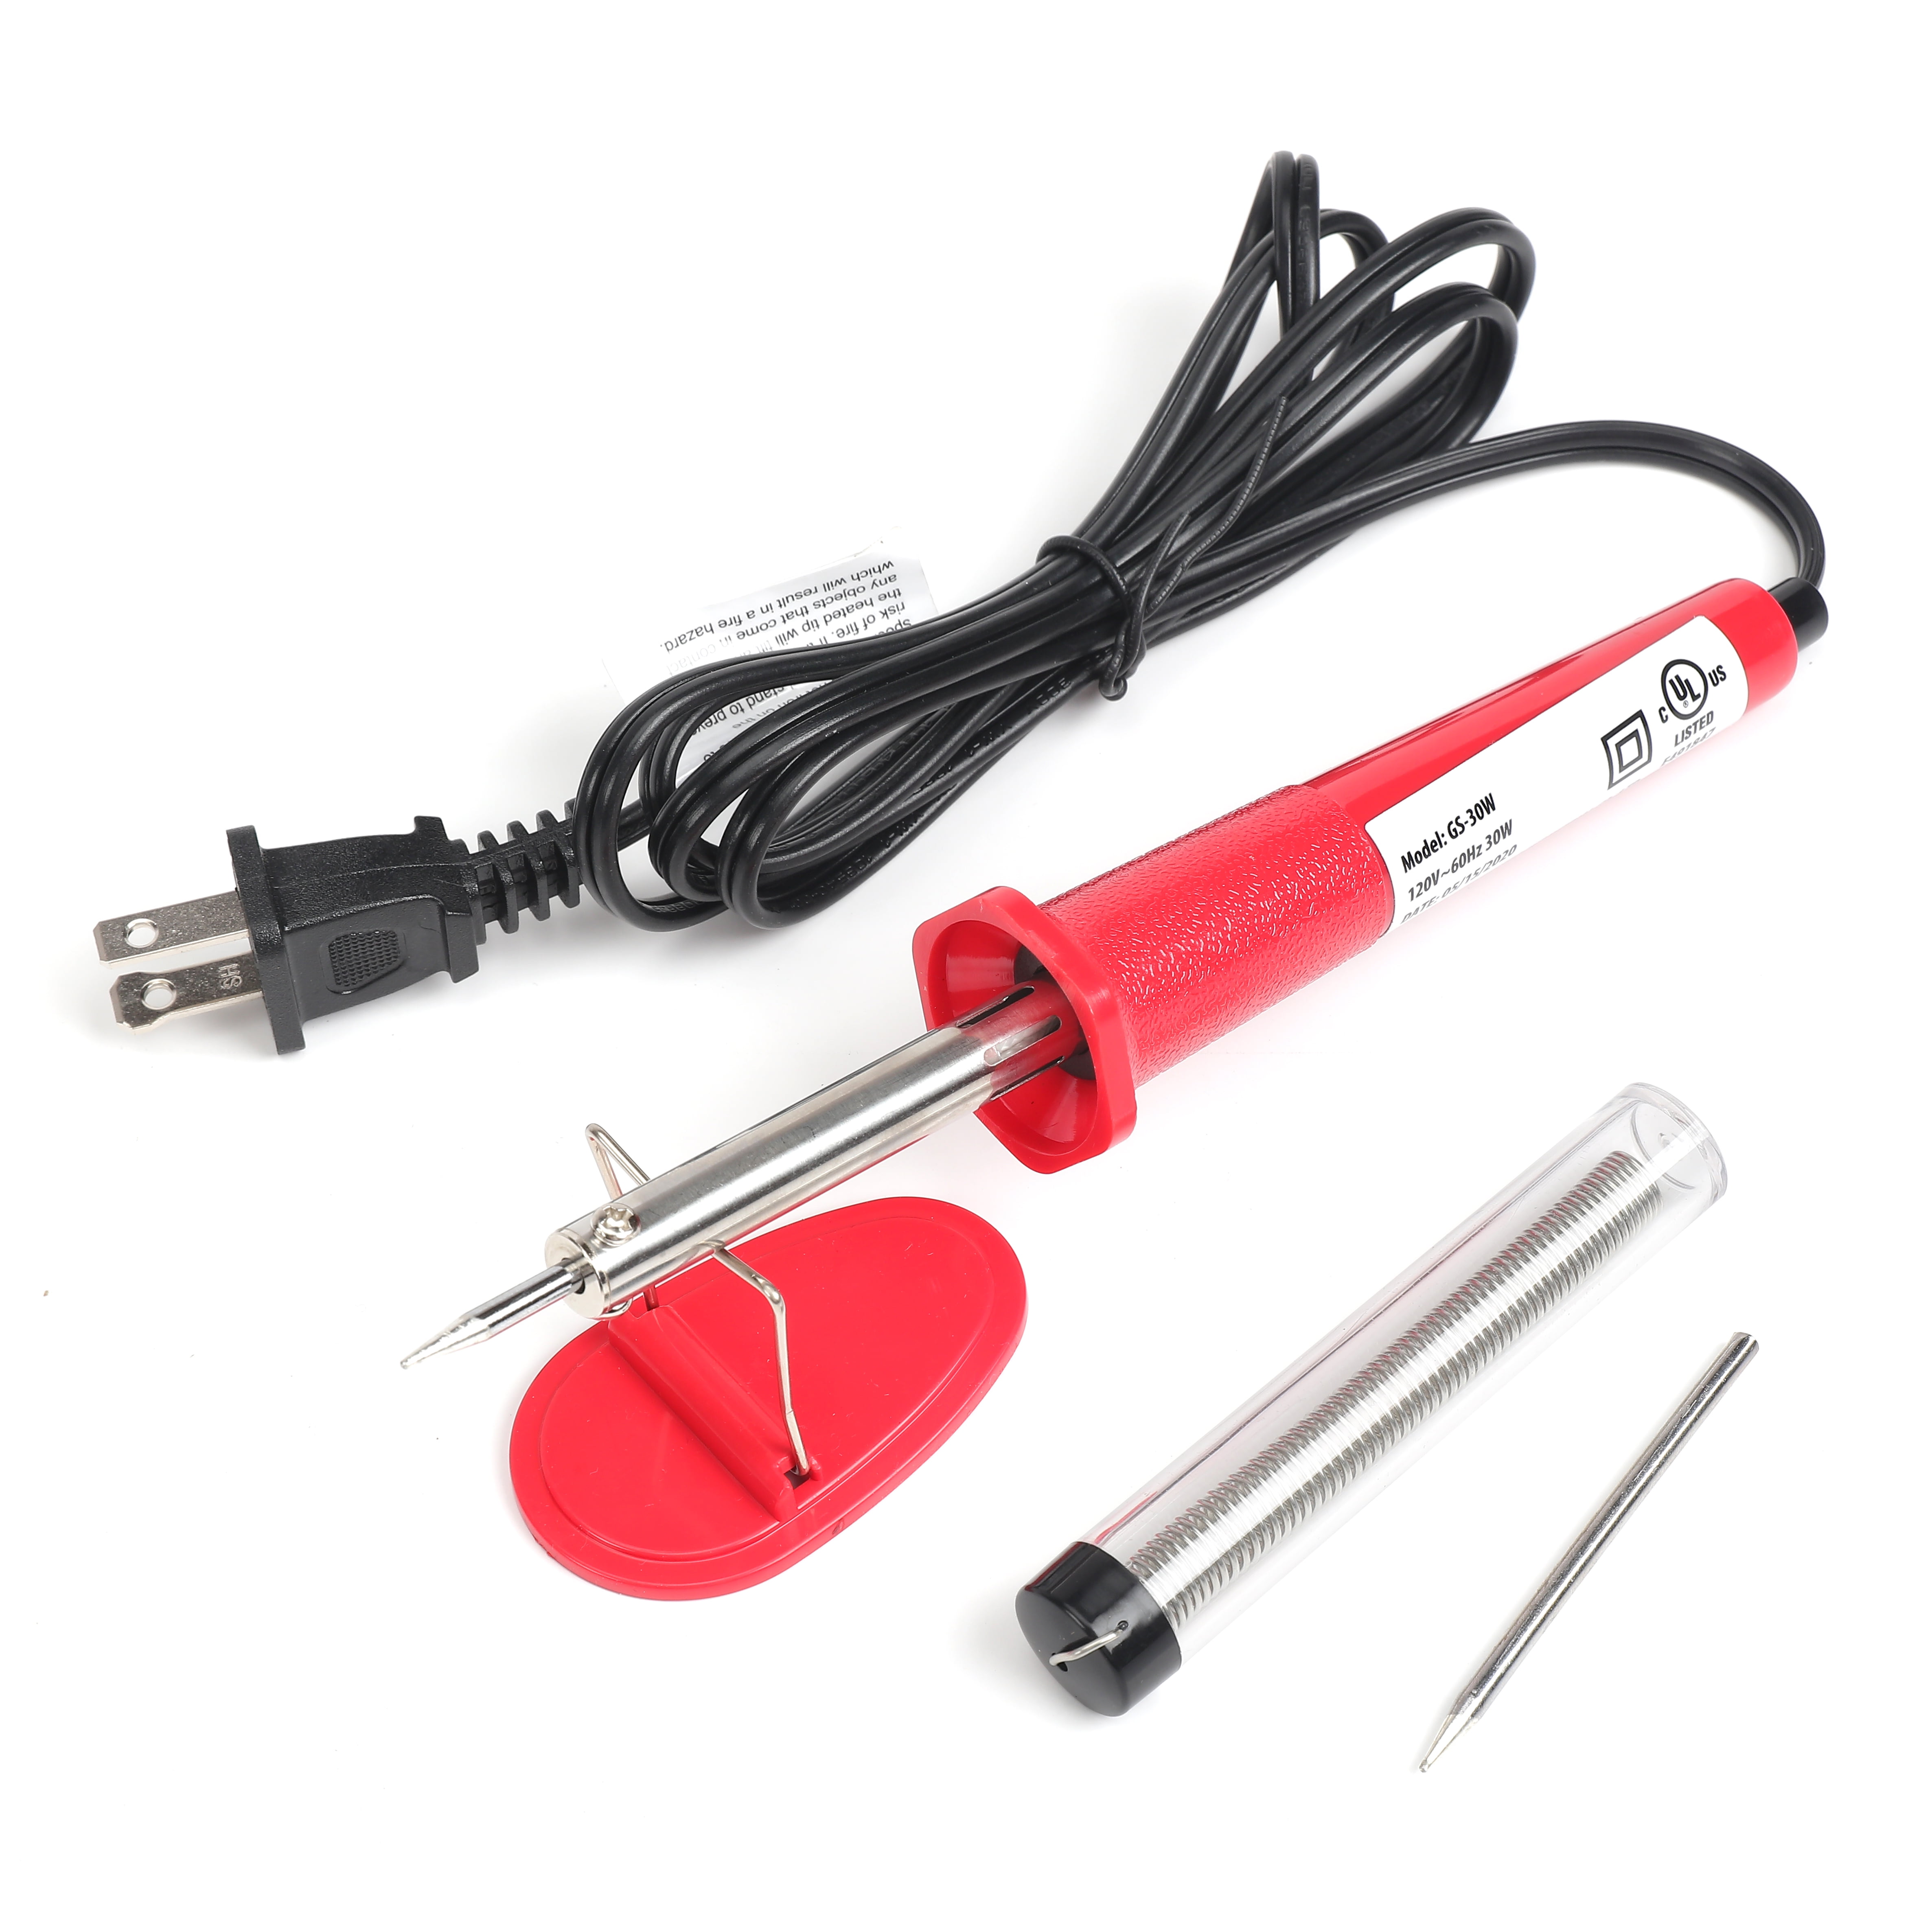 30W Soldering Iron Electricals Home DIY Tool New